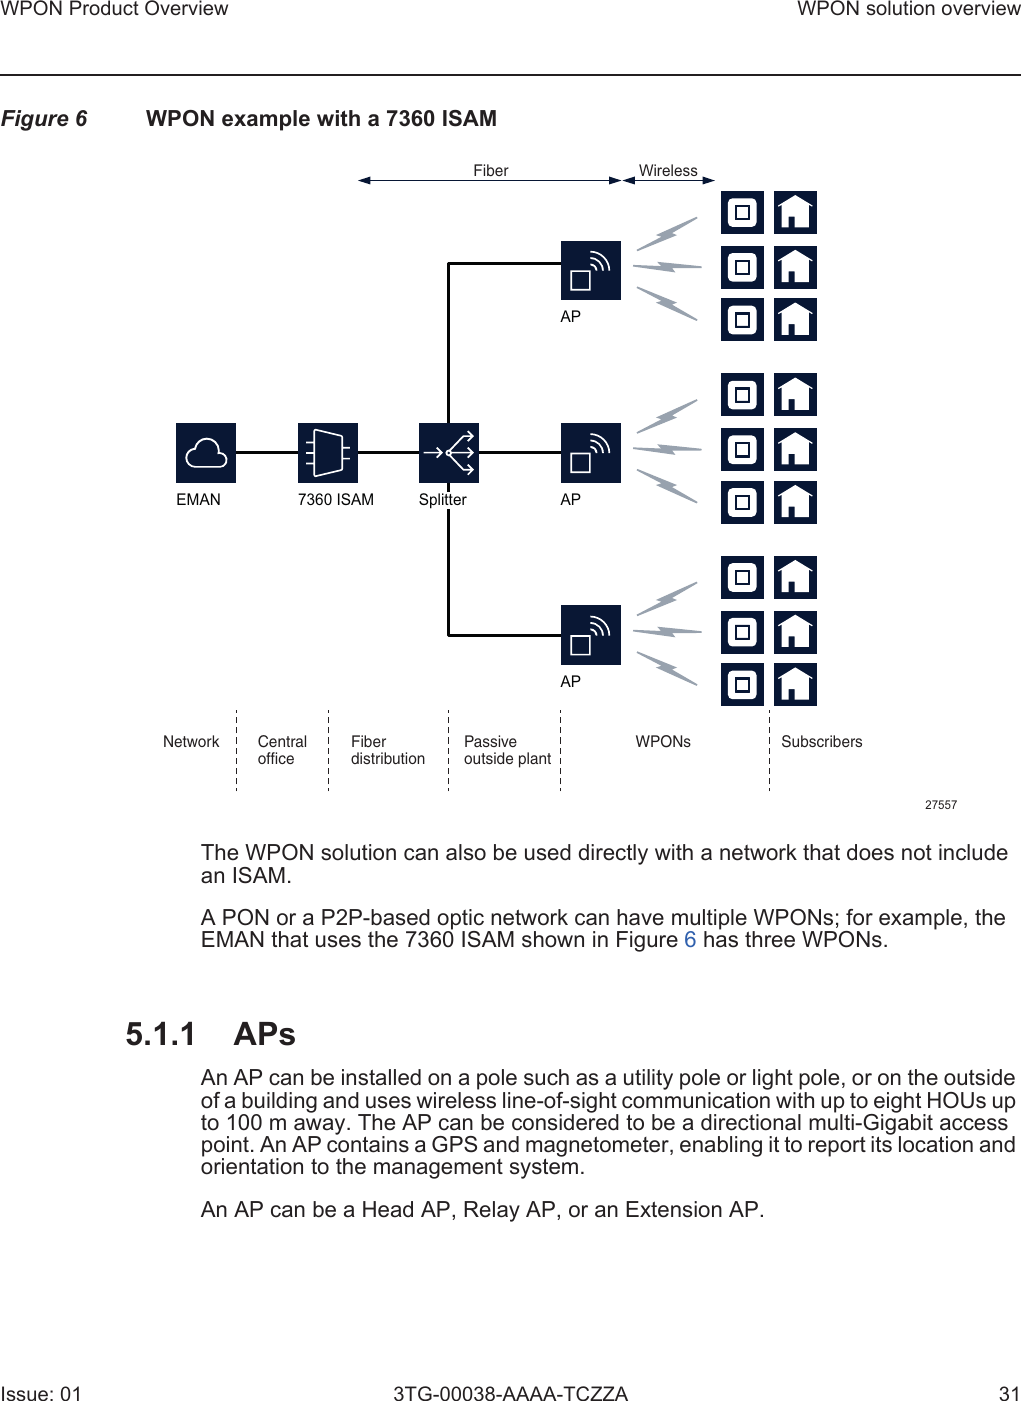 WPON Product Overview WPON solution overviewIssue: 01 3TG-00038-AAAA-TCZZA 31Figure 6 WPON example with a 7360 ISAMThe WPON solution can also be used directly with a network that does not include an ISAM.A PON or a P2P-based optic network can have multiple WPONs; for example, the EMAN that uses the 7360 ISAM shown in Figure 6 has three WPONs. 5.1.1 APsAn AP can be installed on a pole such as a utility pole or light pole, or on the outside of a building and uses wireless line-of-sight communication with up to eight HOUs up to 100 m away. The AP can be considered to be a directional multi-Gigabit access point. An AP contains a GPS and magnetometer, enabling it to report its location and orientation to the management system. An AP can be a Head AP, Relay AP, or an Extension AP.APEMANWirelessFiberSubscribersWPONsPassiveoutside plantFiberdistributionCentralofficeNetwork275577360 ISAMAPAPSplitter